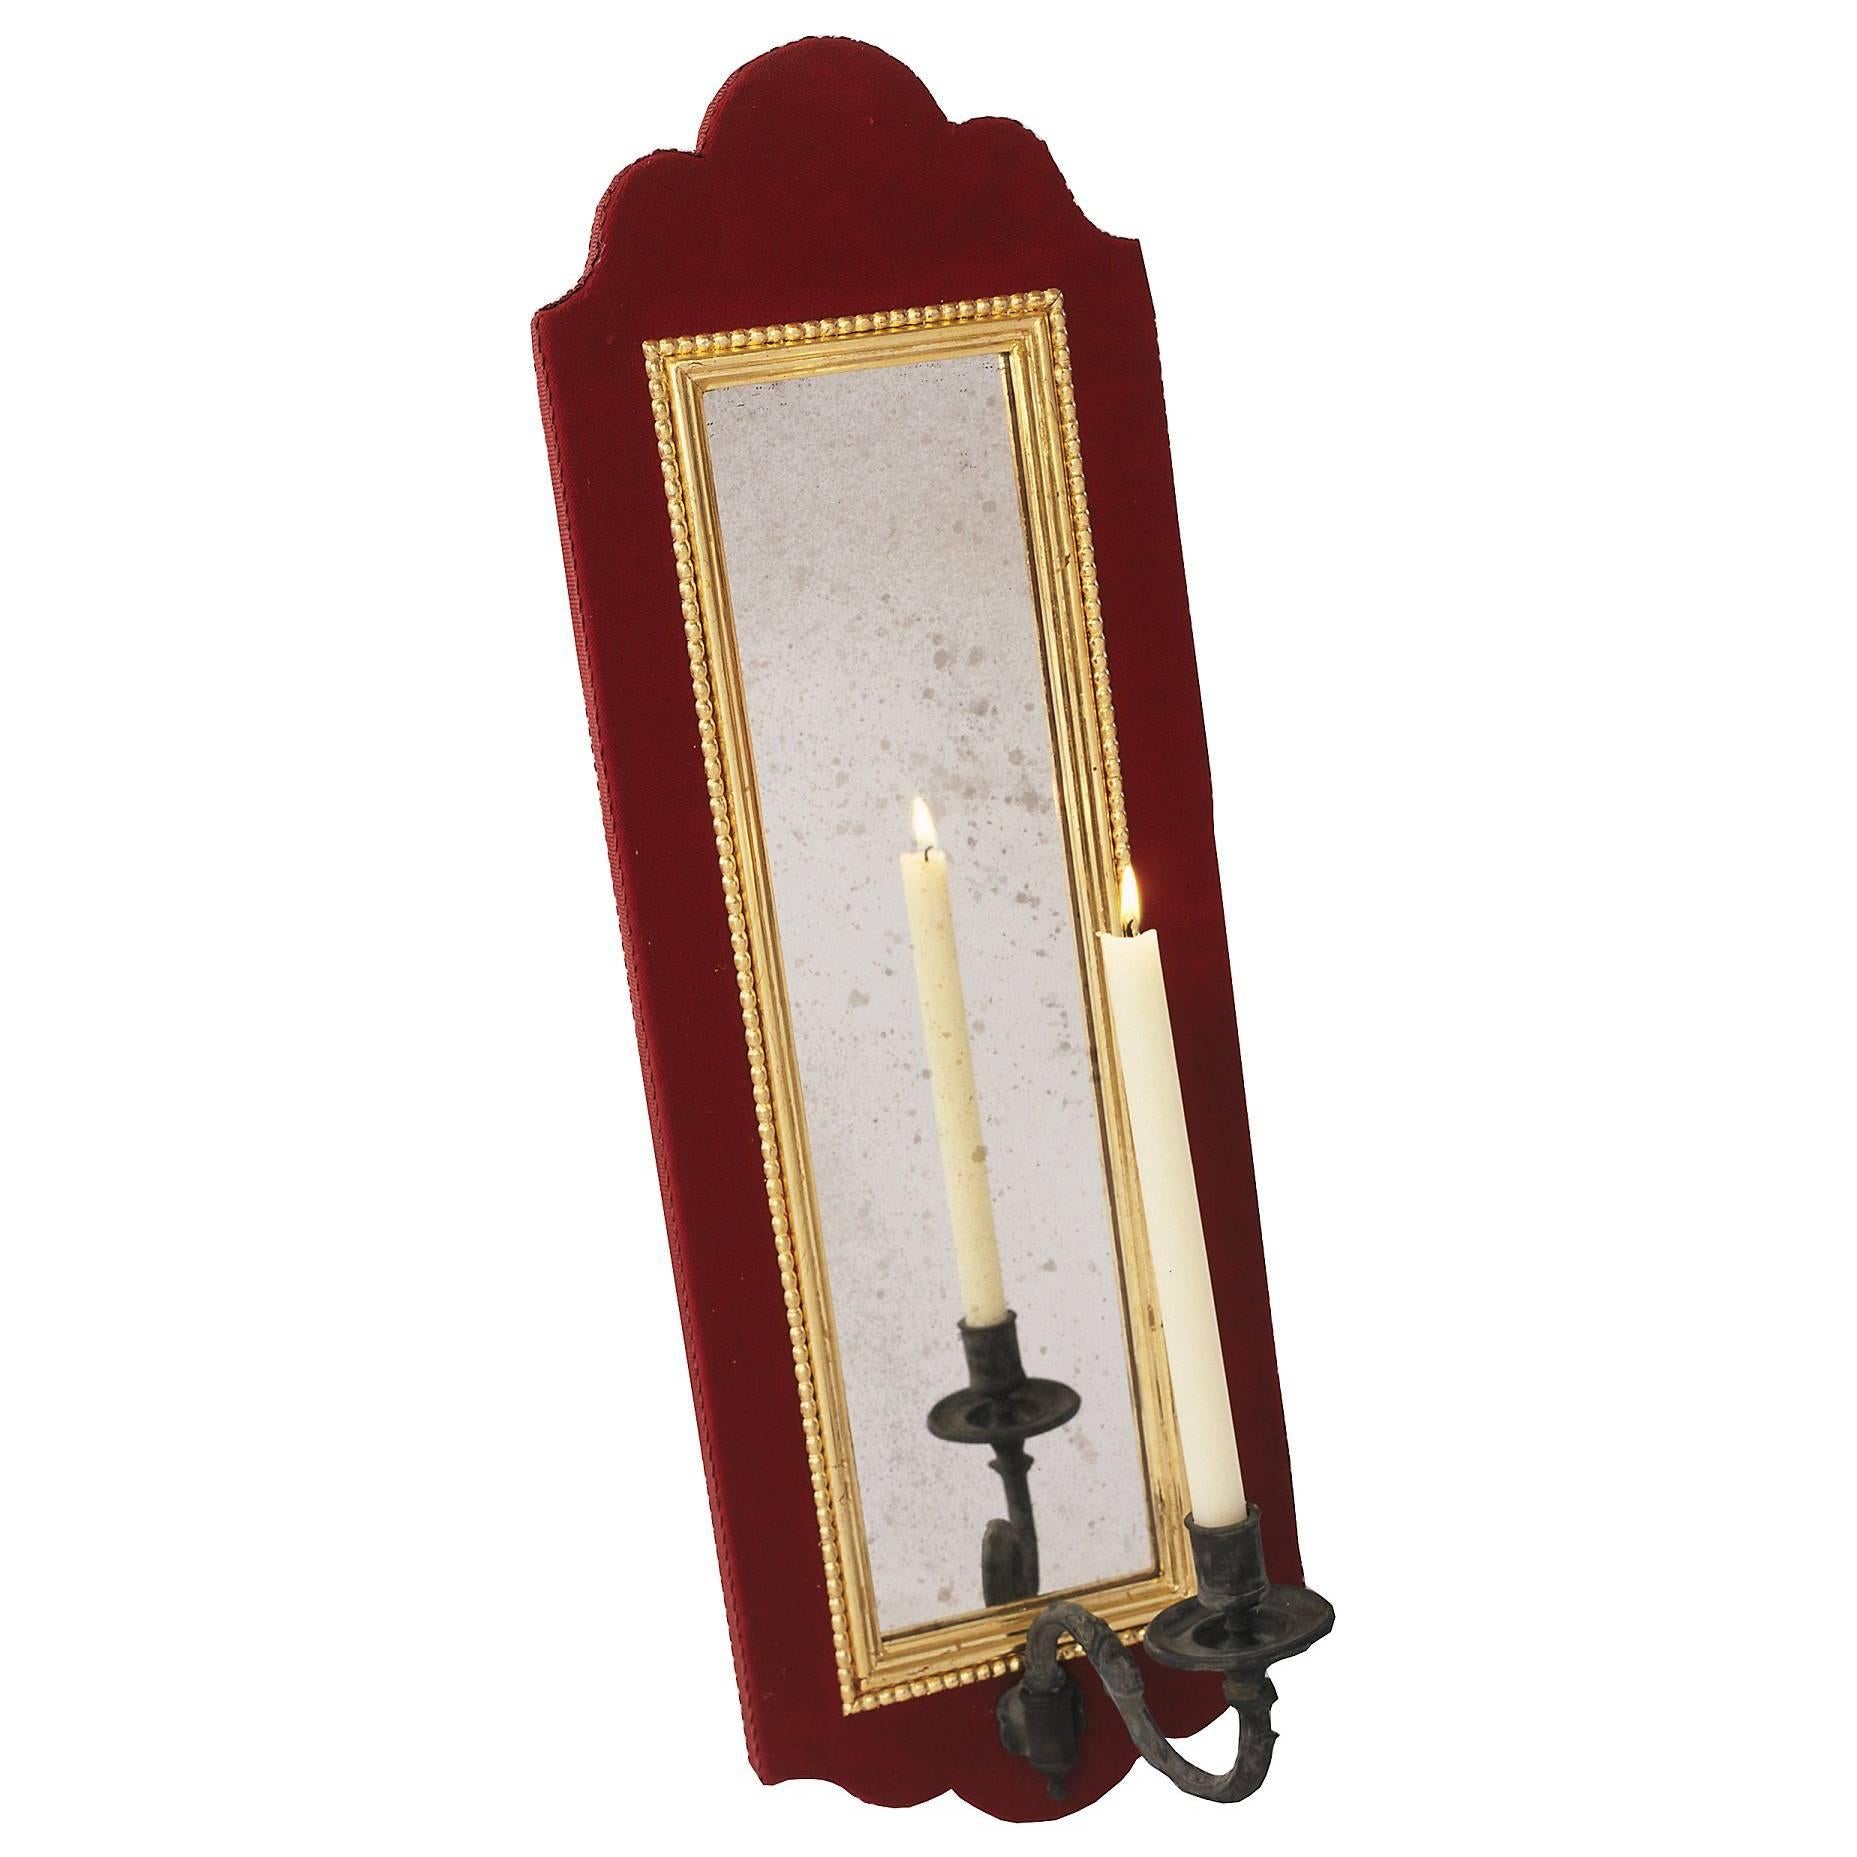 The Nero mirrored Girandole candelabra designed by Alidad Ltd and Thomas Messel and inspired by Baroque and neoclassical designs is shown here in black Crocagator finish with gilt filleting at edges and bronzed candleholder
Also available in a